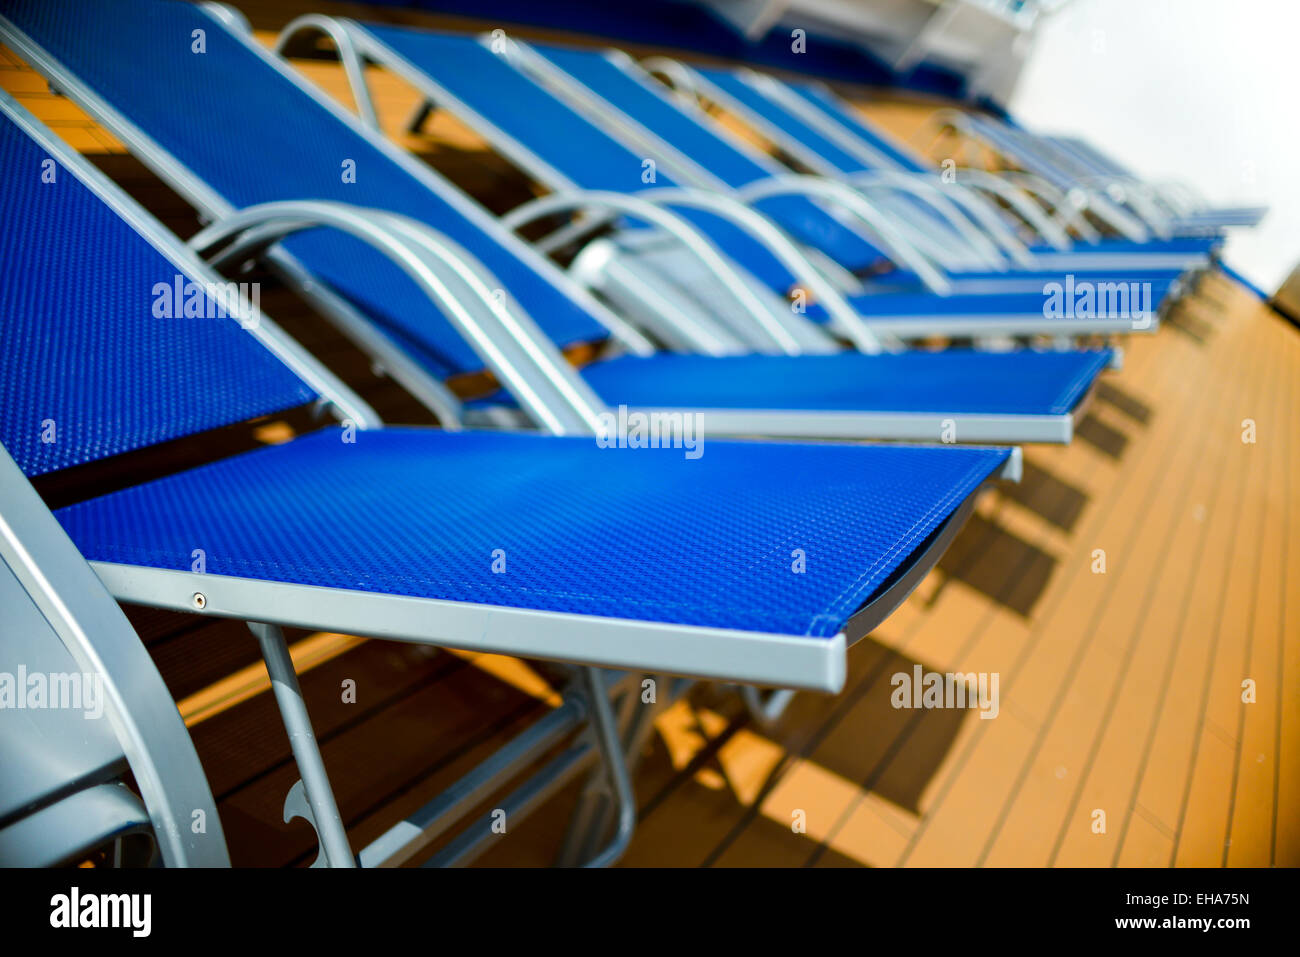 blue sun beds lined up on deck Stock Photo